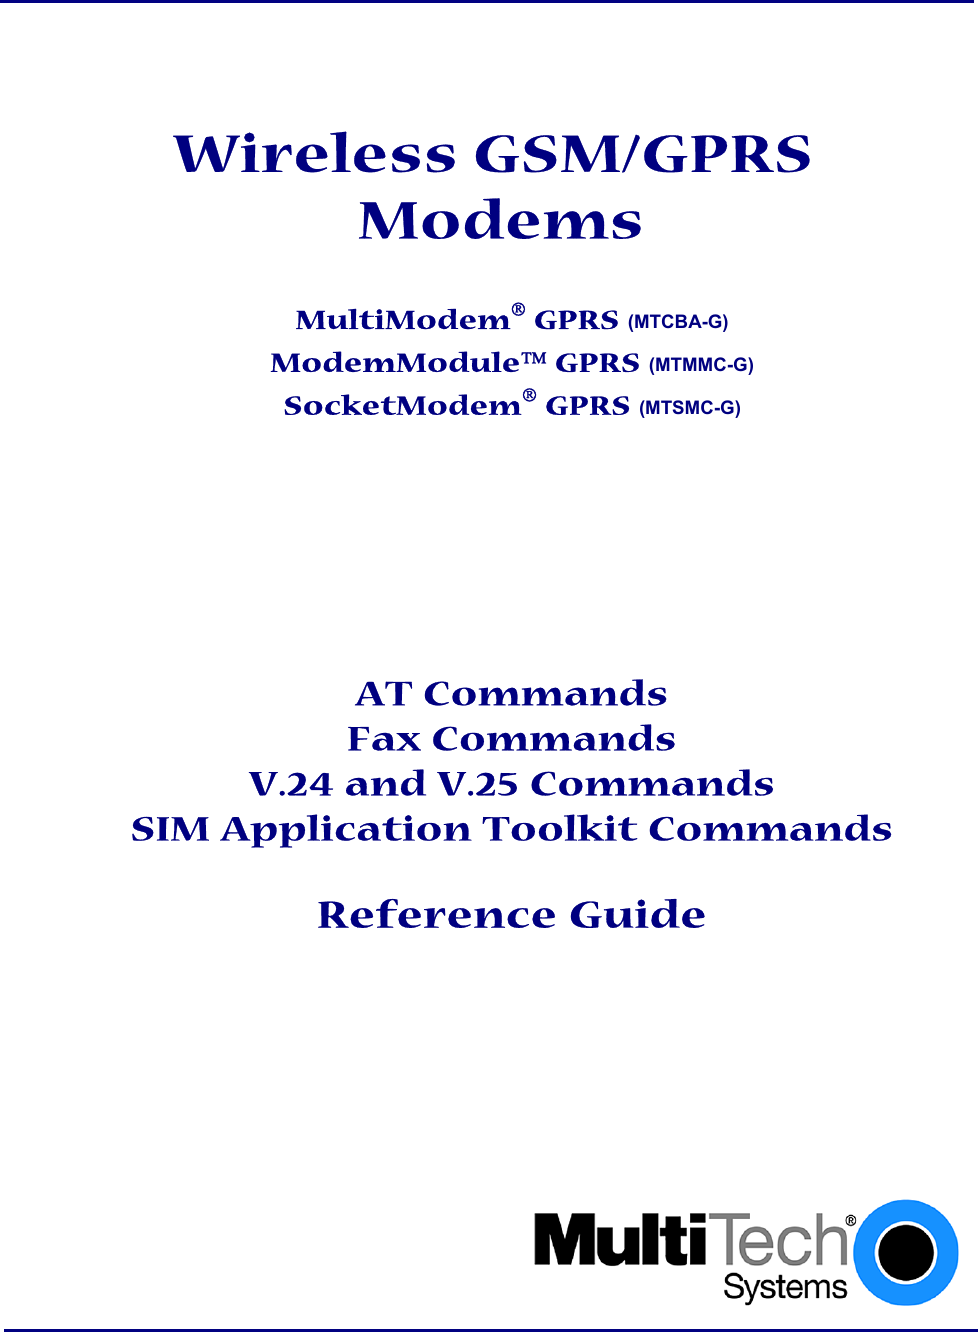     Wireless GSM/GPRS  Modems  MultiModem GPRS (MTCBA-G) ModemModule GPRS (MTMMC-G) SocketModem GPRS (MTSMC-G)     AT Commands Fax Commands V.24 and V.25 Commands SIM Application Toolkit Commands   Reference Guide              